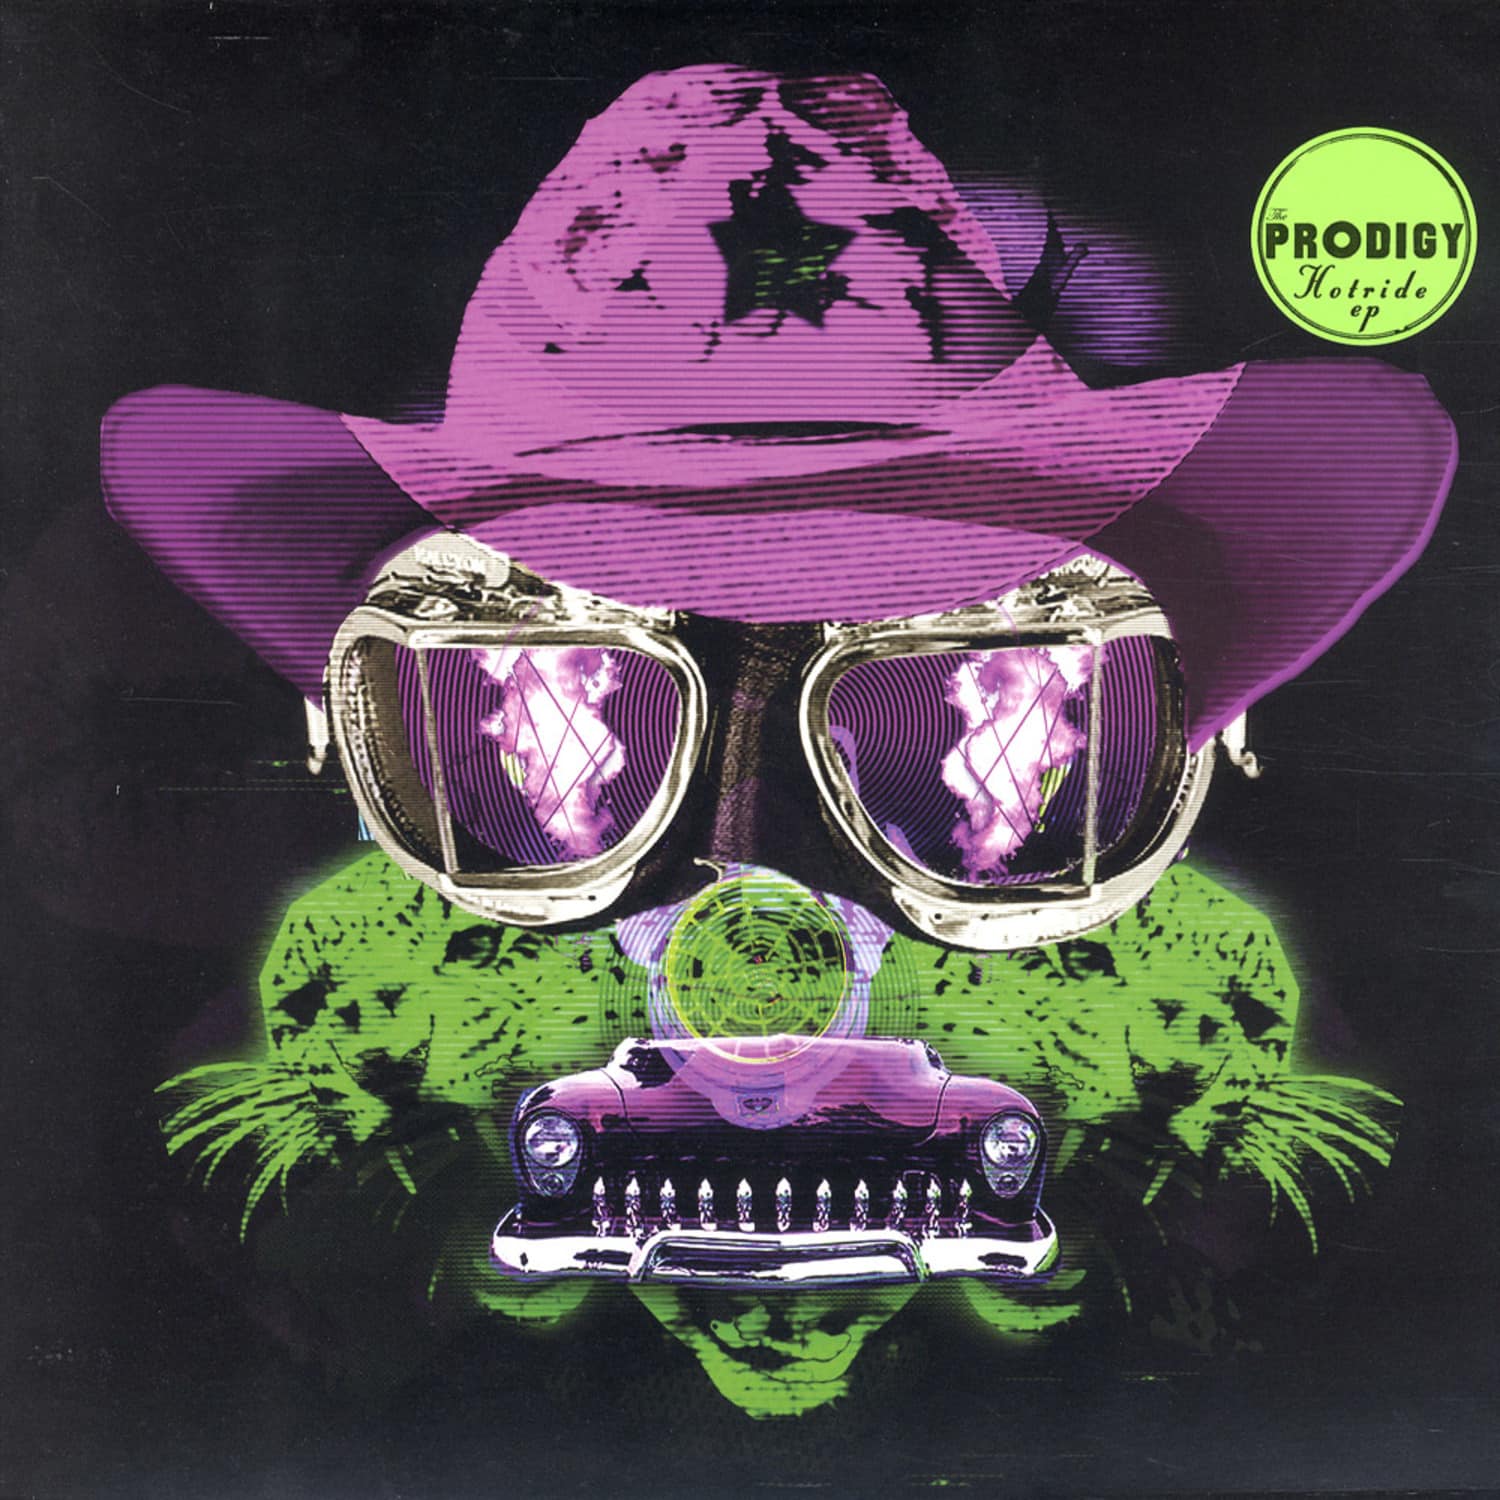 The Prodigy - HOTRIDE EP